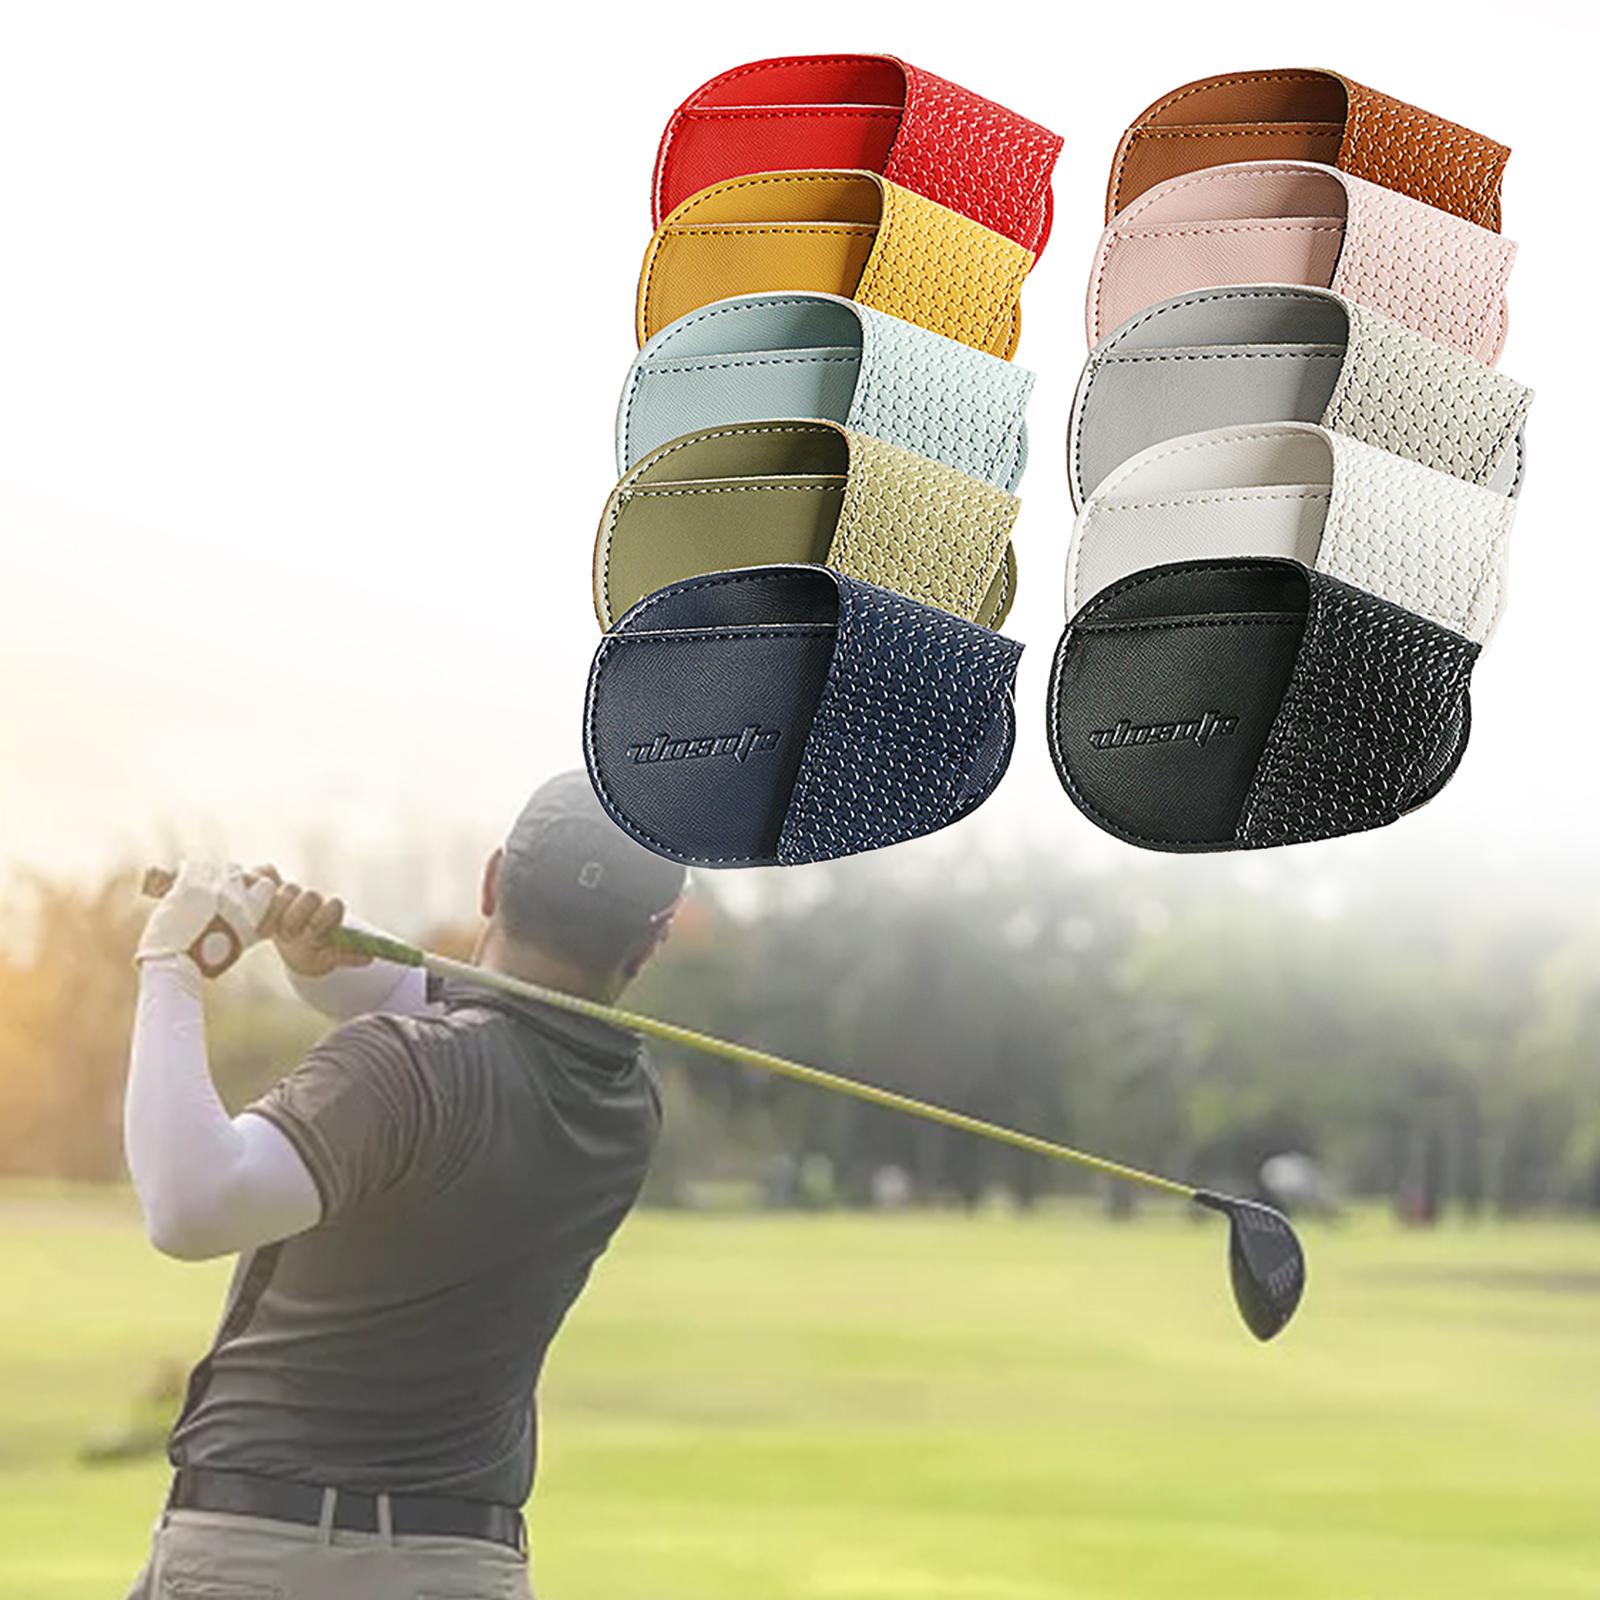 Golf Head Covers PU Portable Protector for Athlete Travel Golf Training Multi Color Size Small